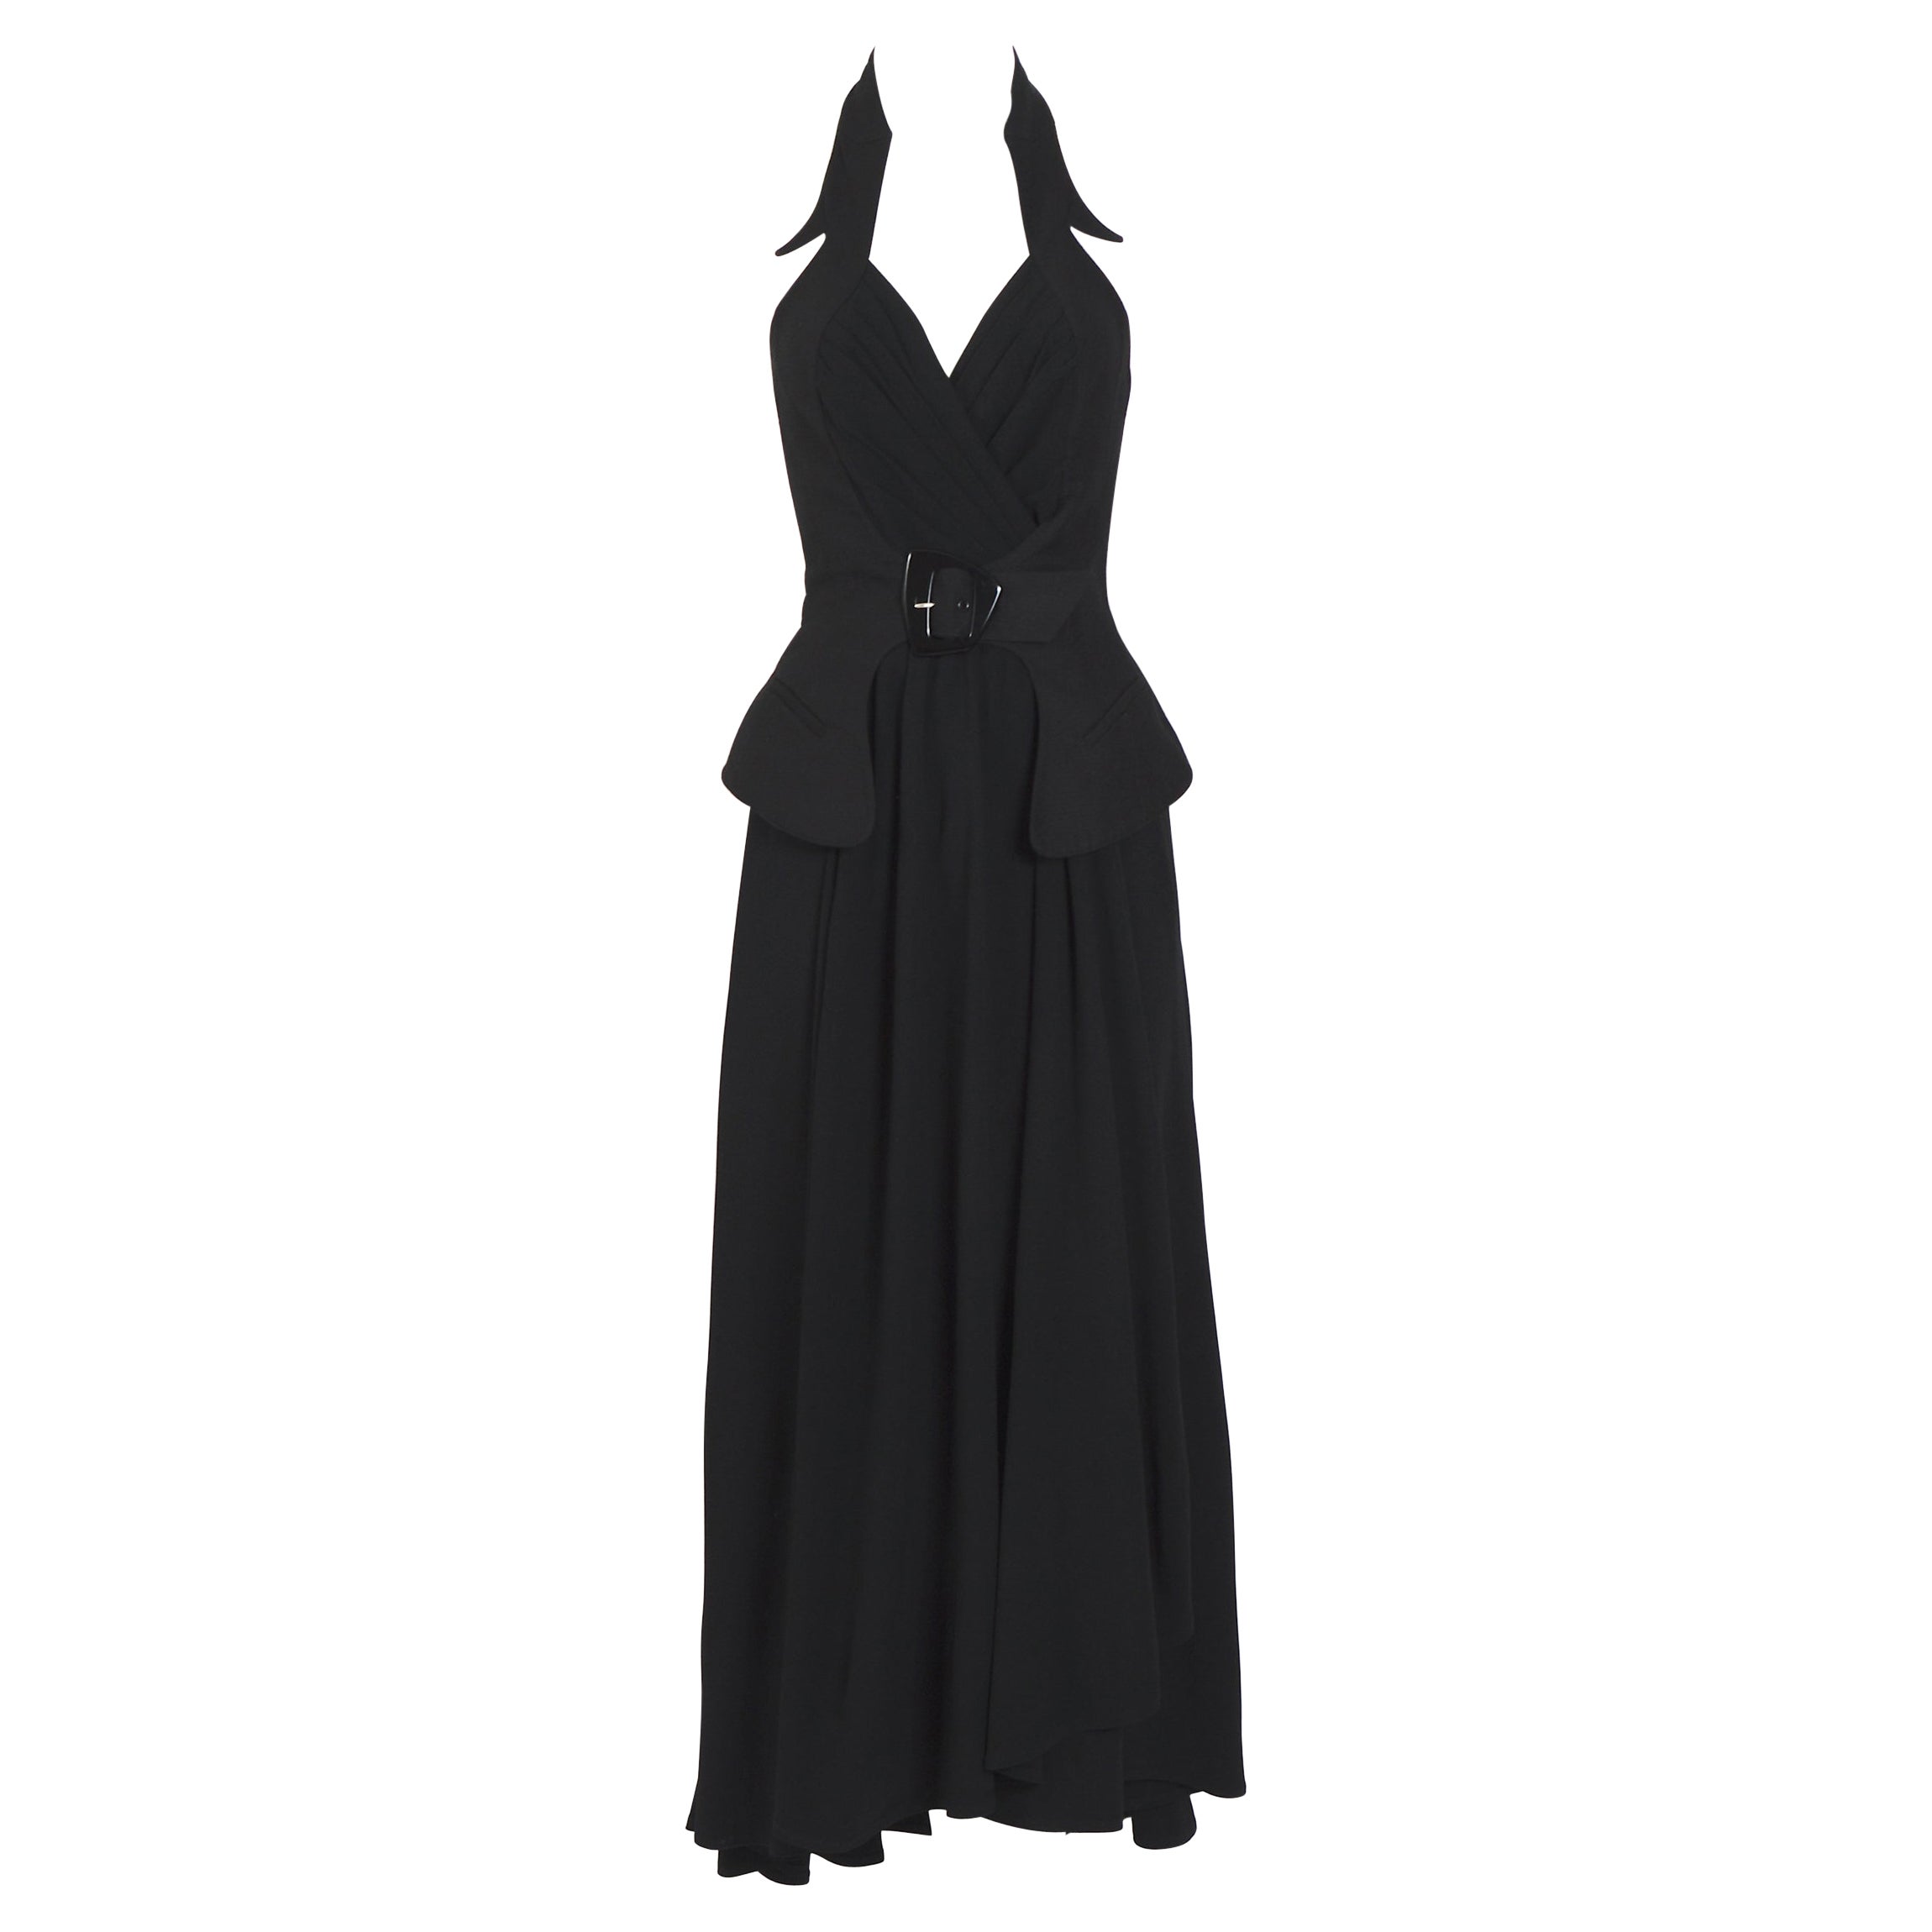 1989 Thierry Mugler White and Black Crepe Corset Cocktail Dress at 1stDibs